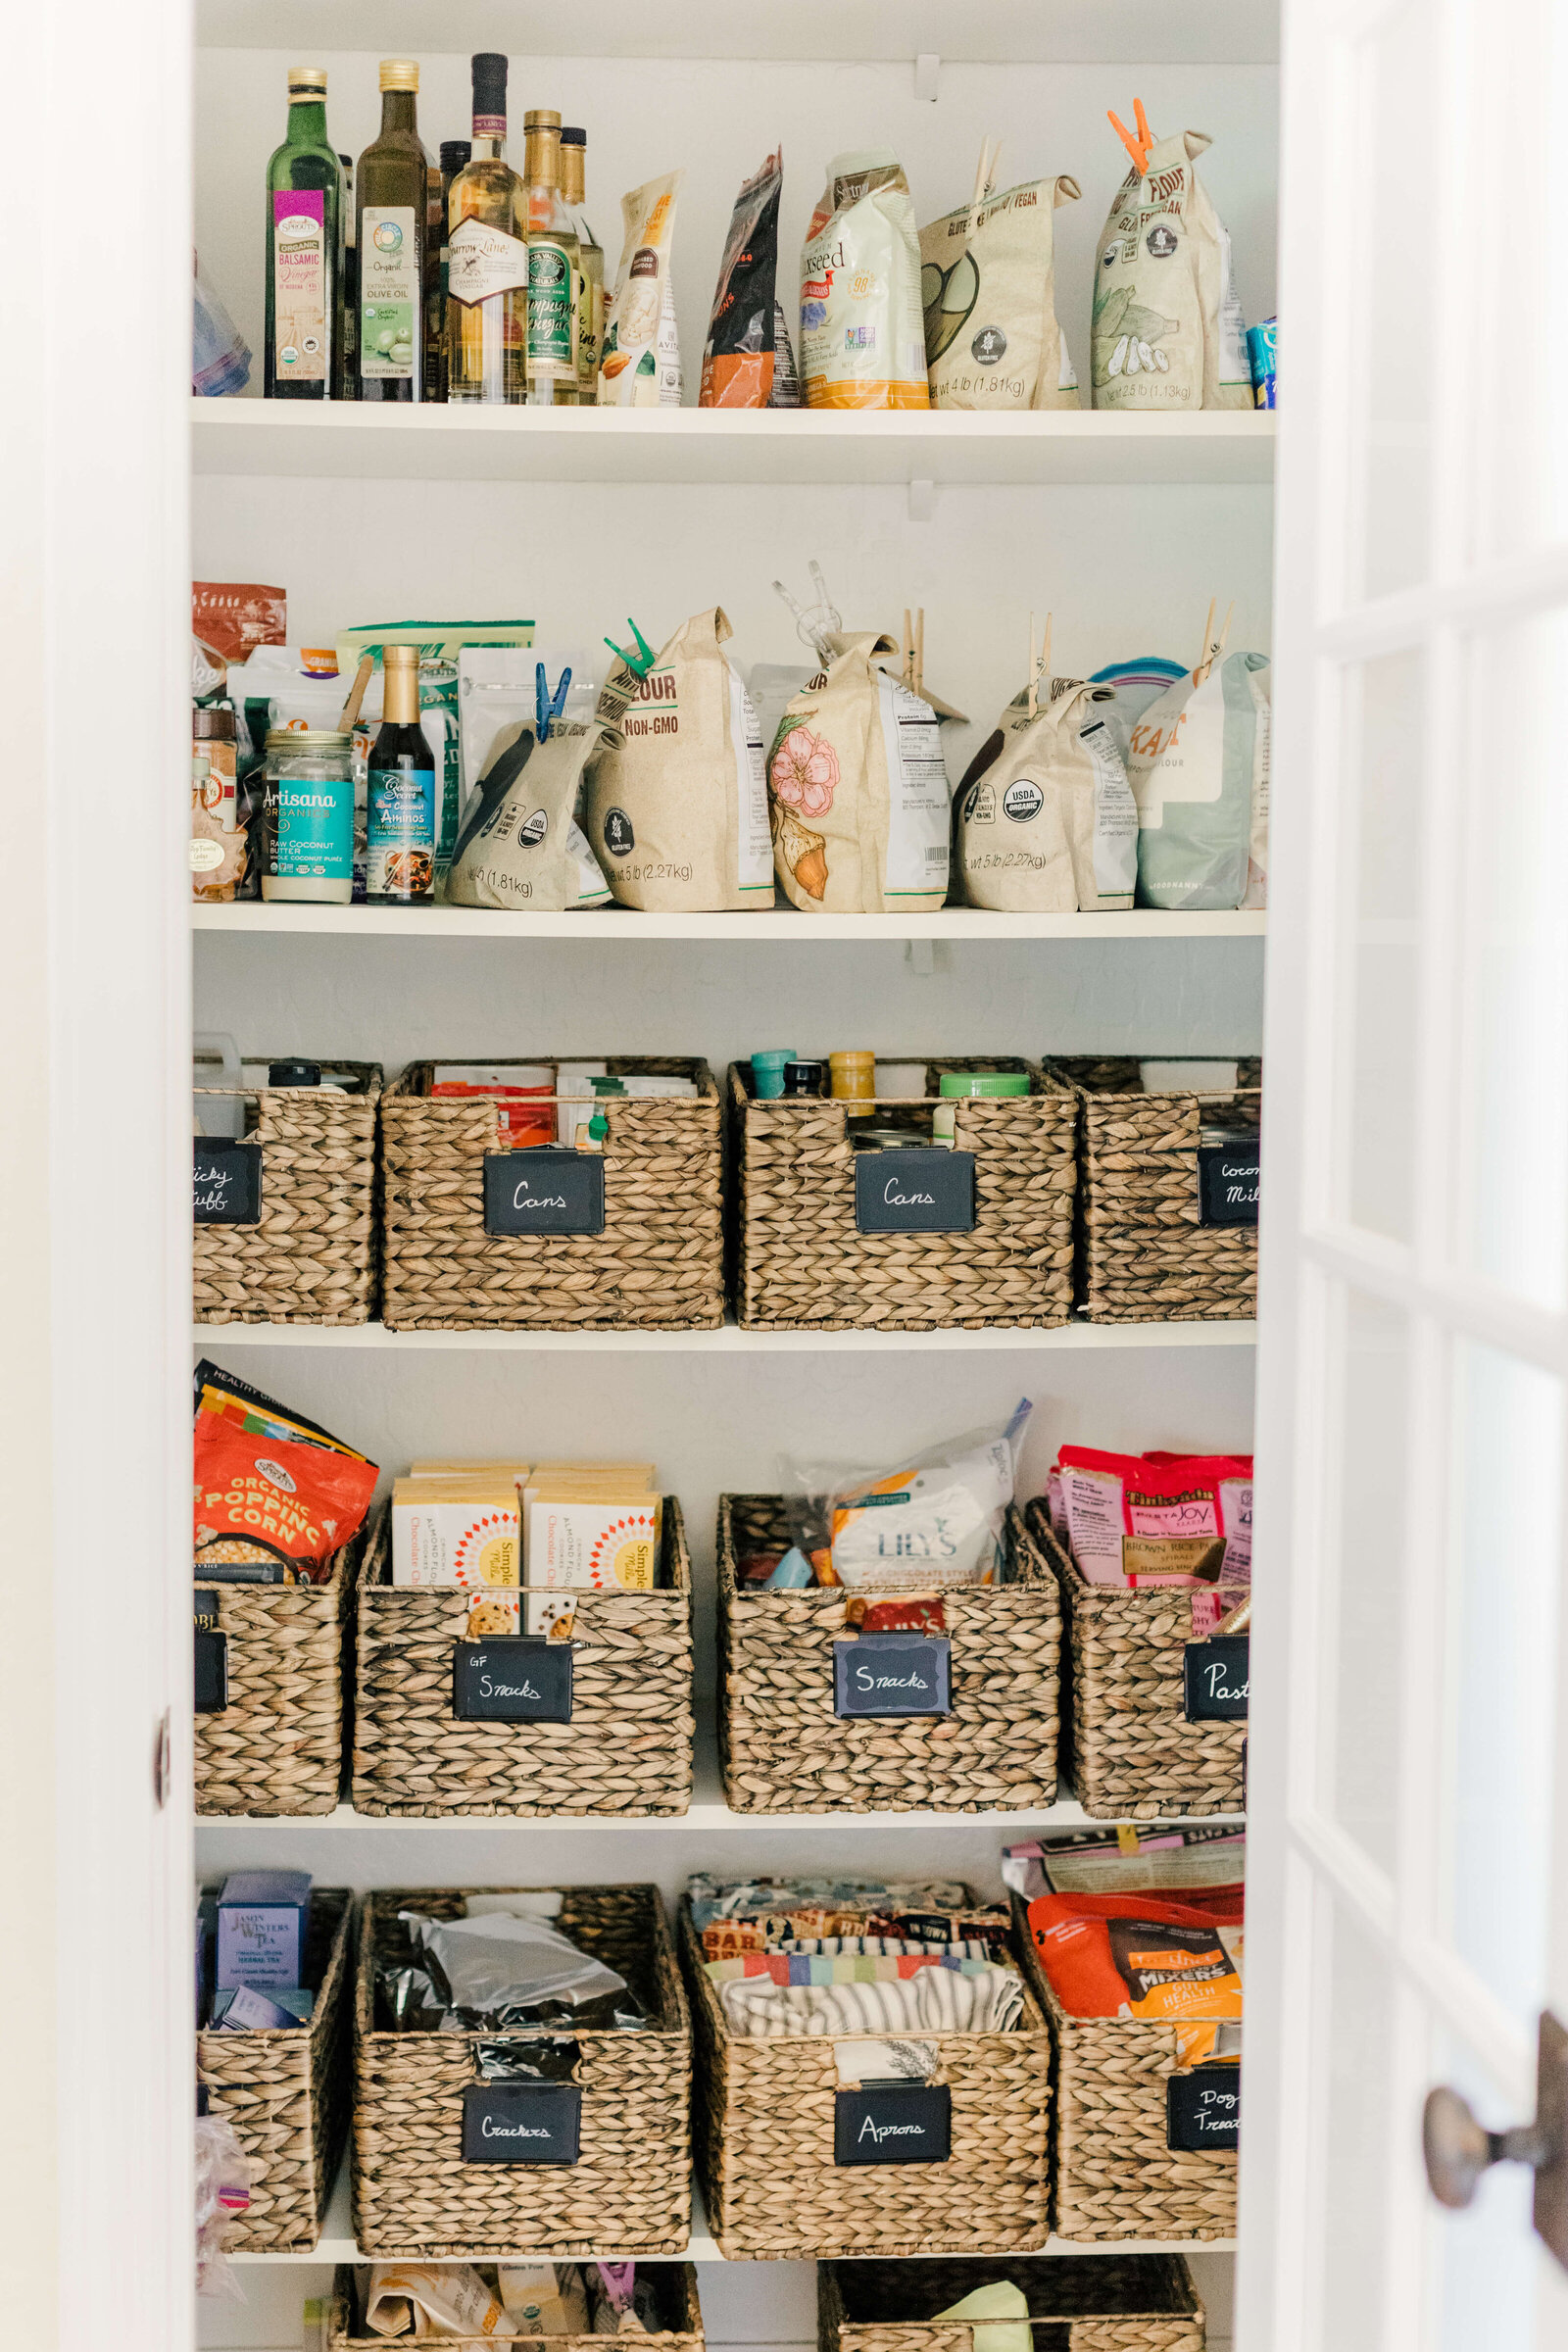 Peek-into-my-kitchen-for-more-healthy-living-resources-Bethie-Grondin-0